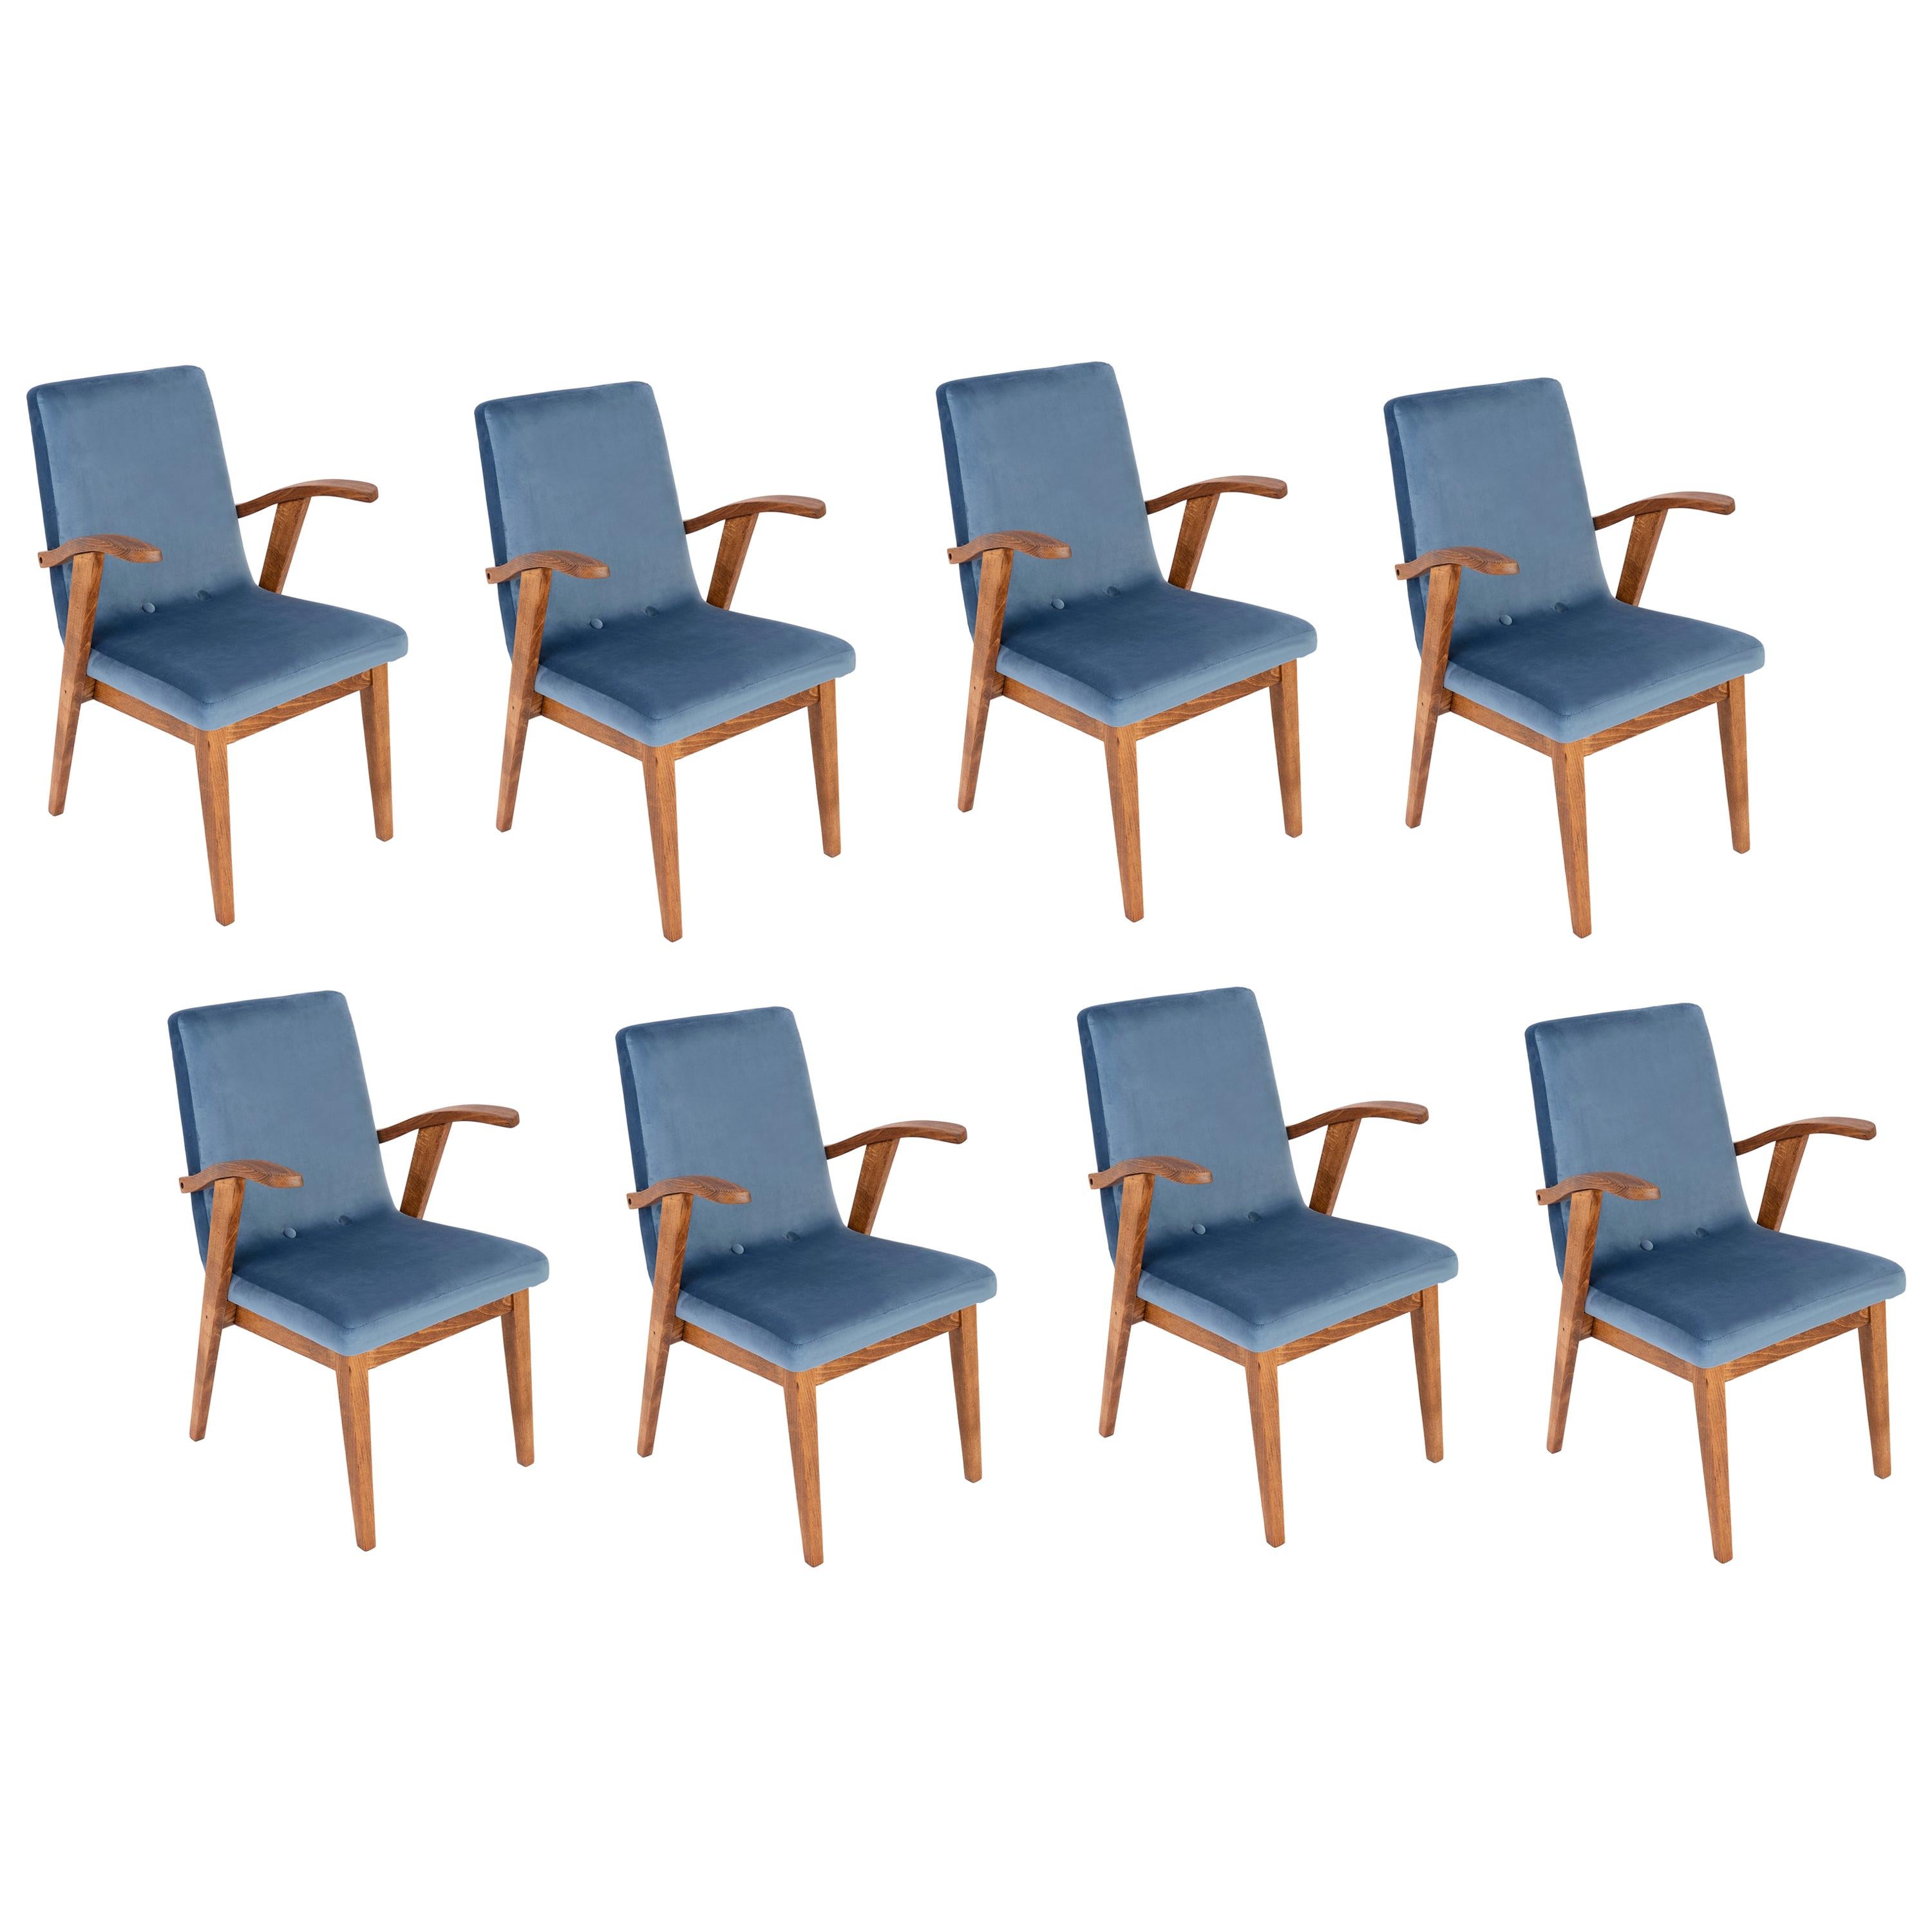 Set of Eight 20th Century Vintage Blue Chairs by Mieczyslaw Puchala, 1960s